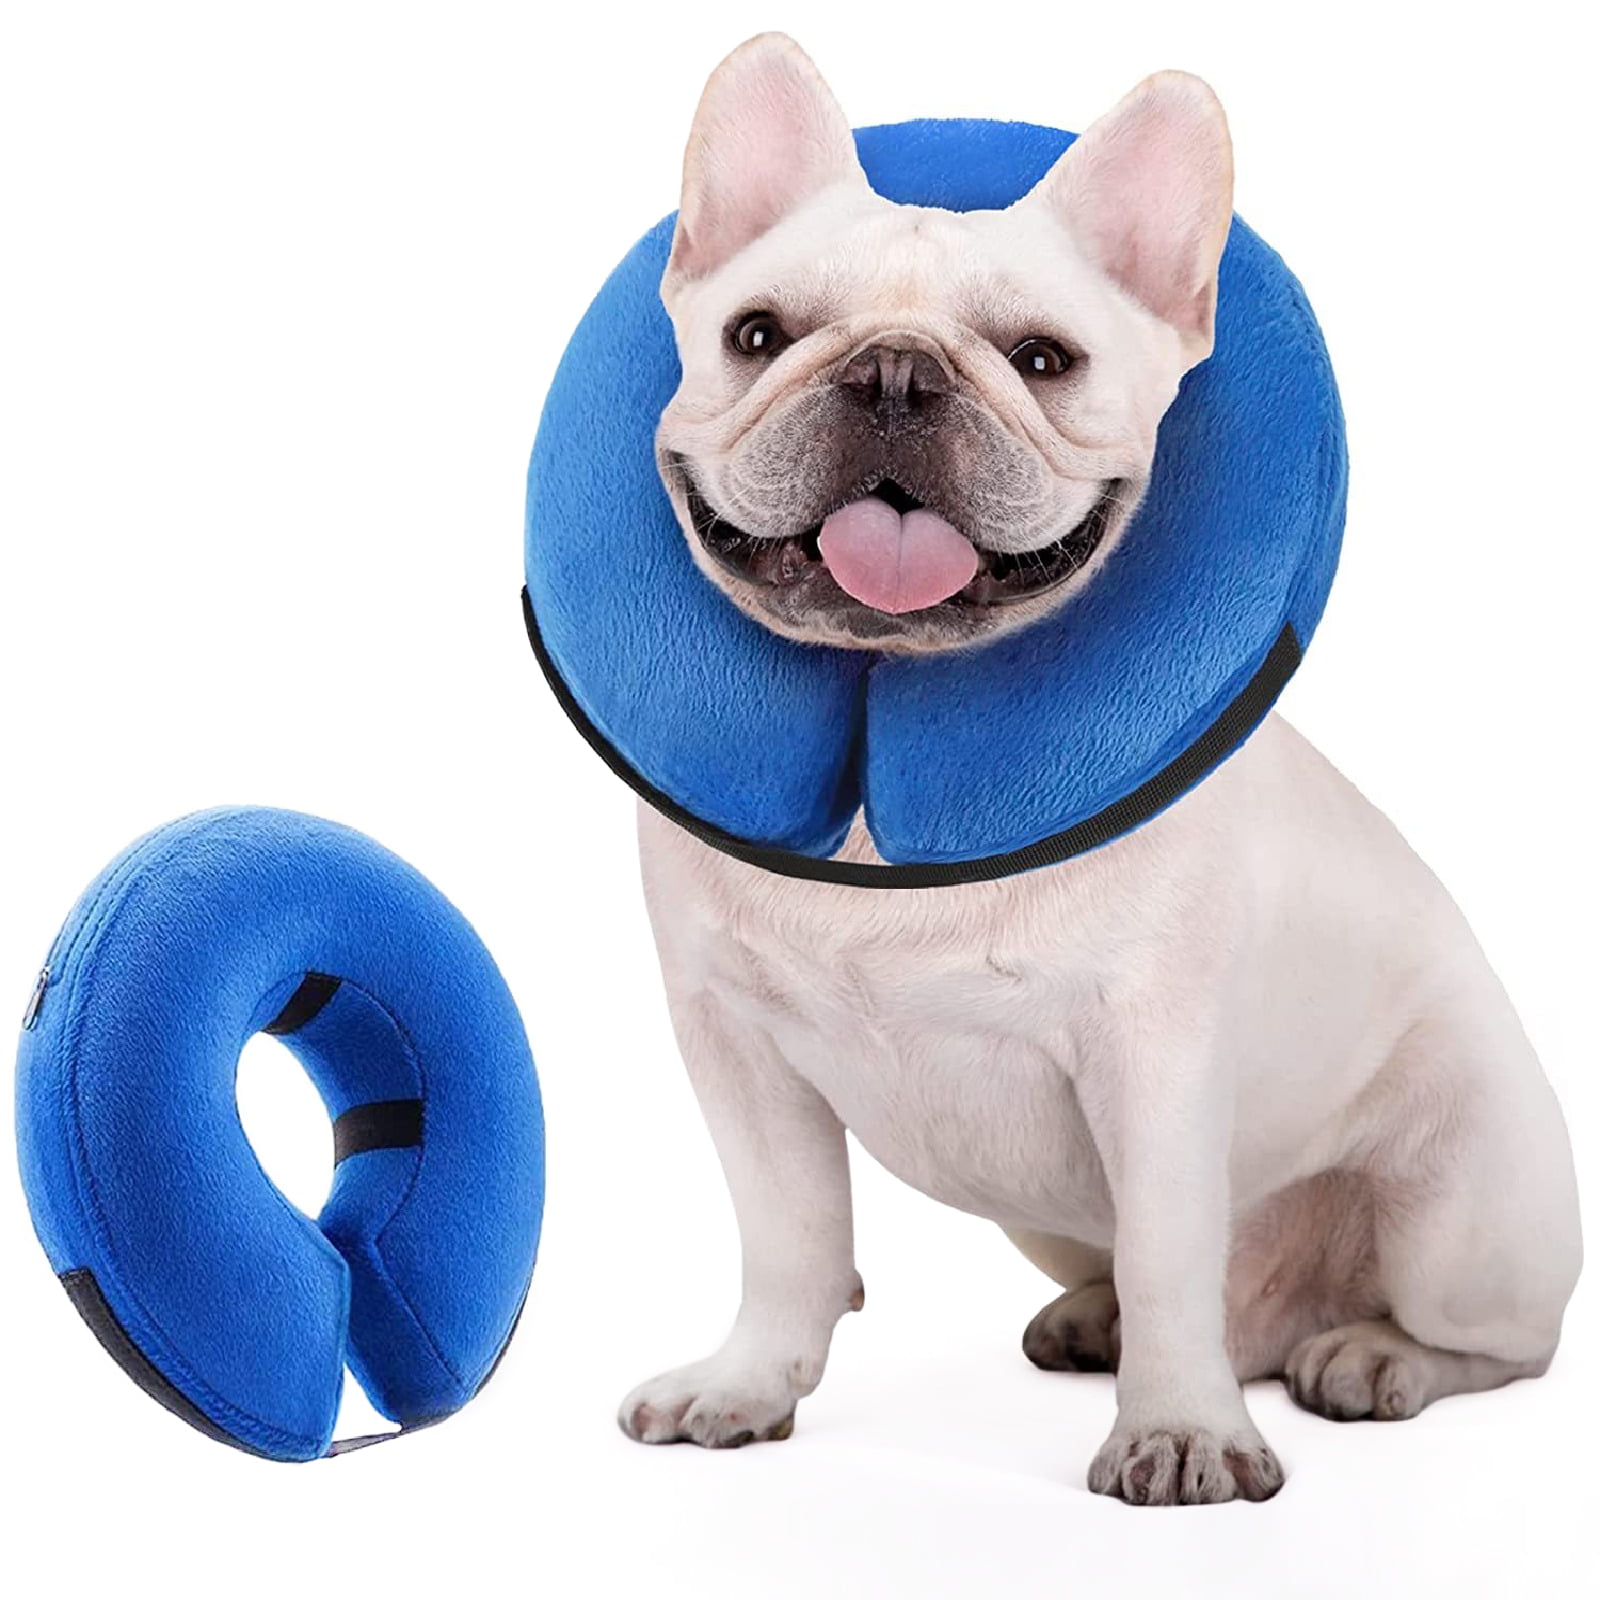 4-5 lbs DEFUTAY Cat Recovery Collar Adjustable Pet Cone Comfy Protective Collar for After Surgery Anti-Bite Lick Wound Healing Safety Practical Plastic E-Collar for Small Kitten Mini Dog 